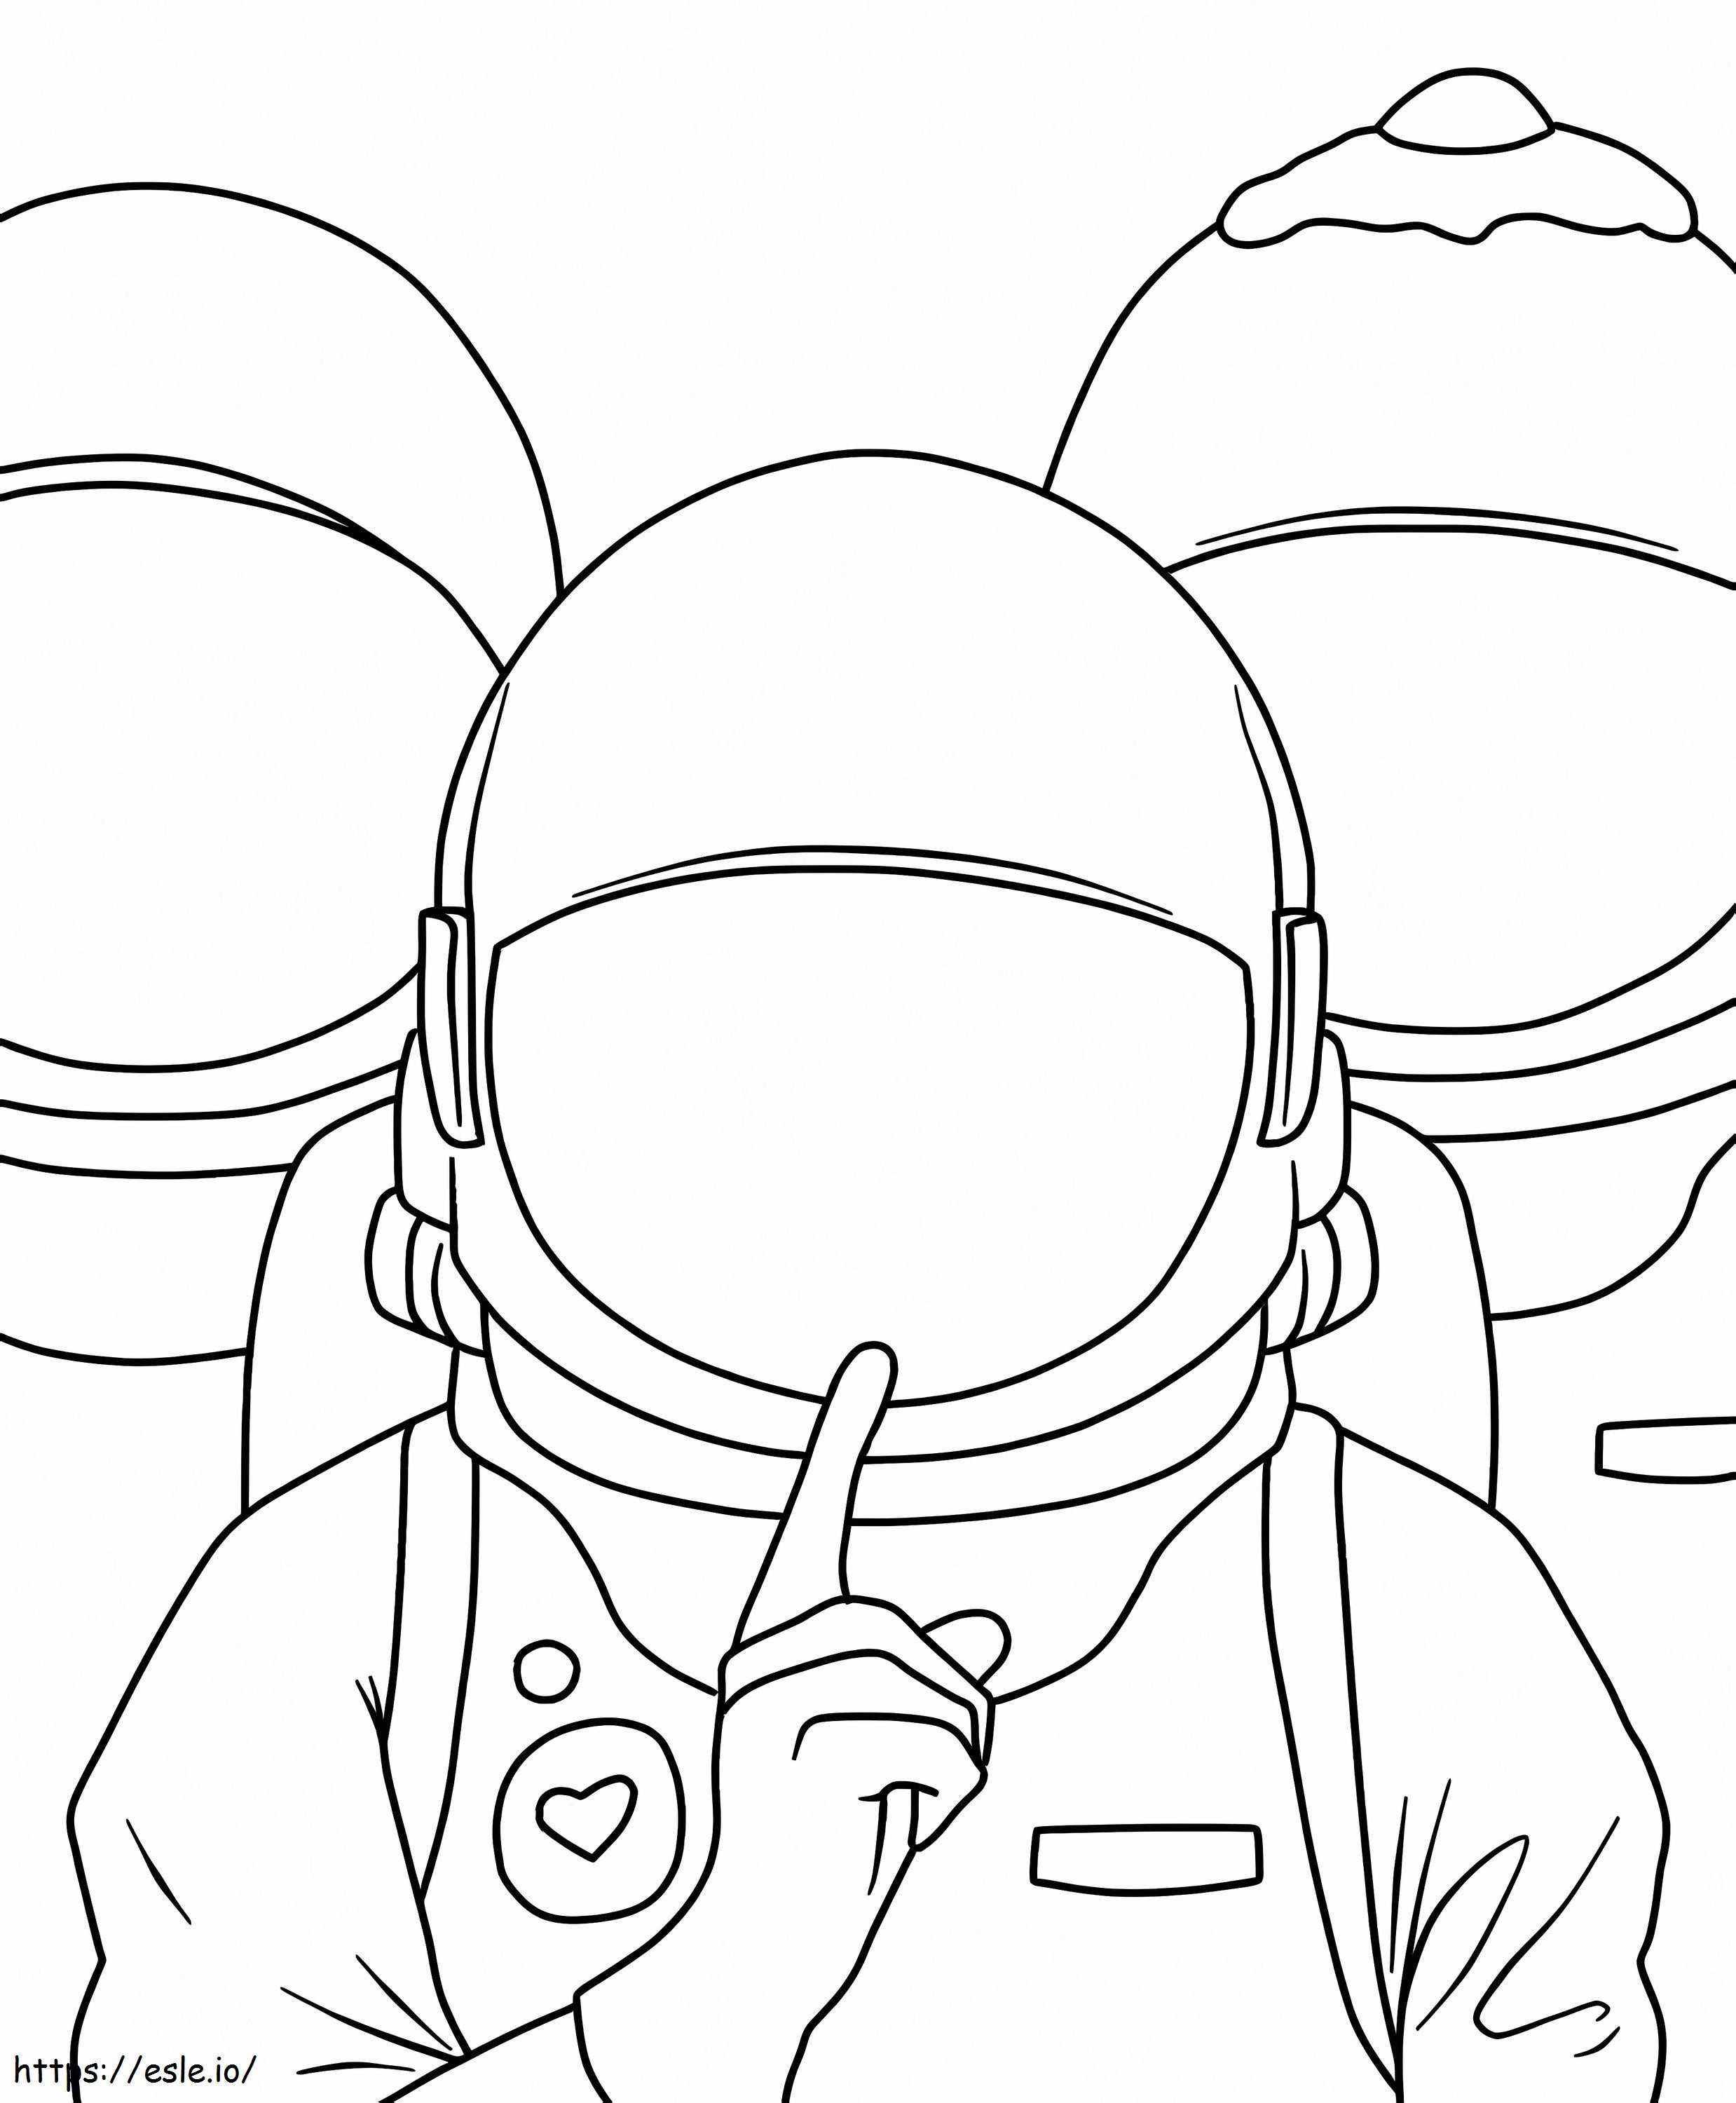 Keep Quiet Please coloring page